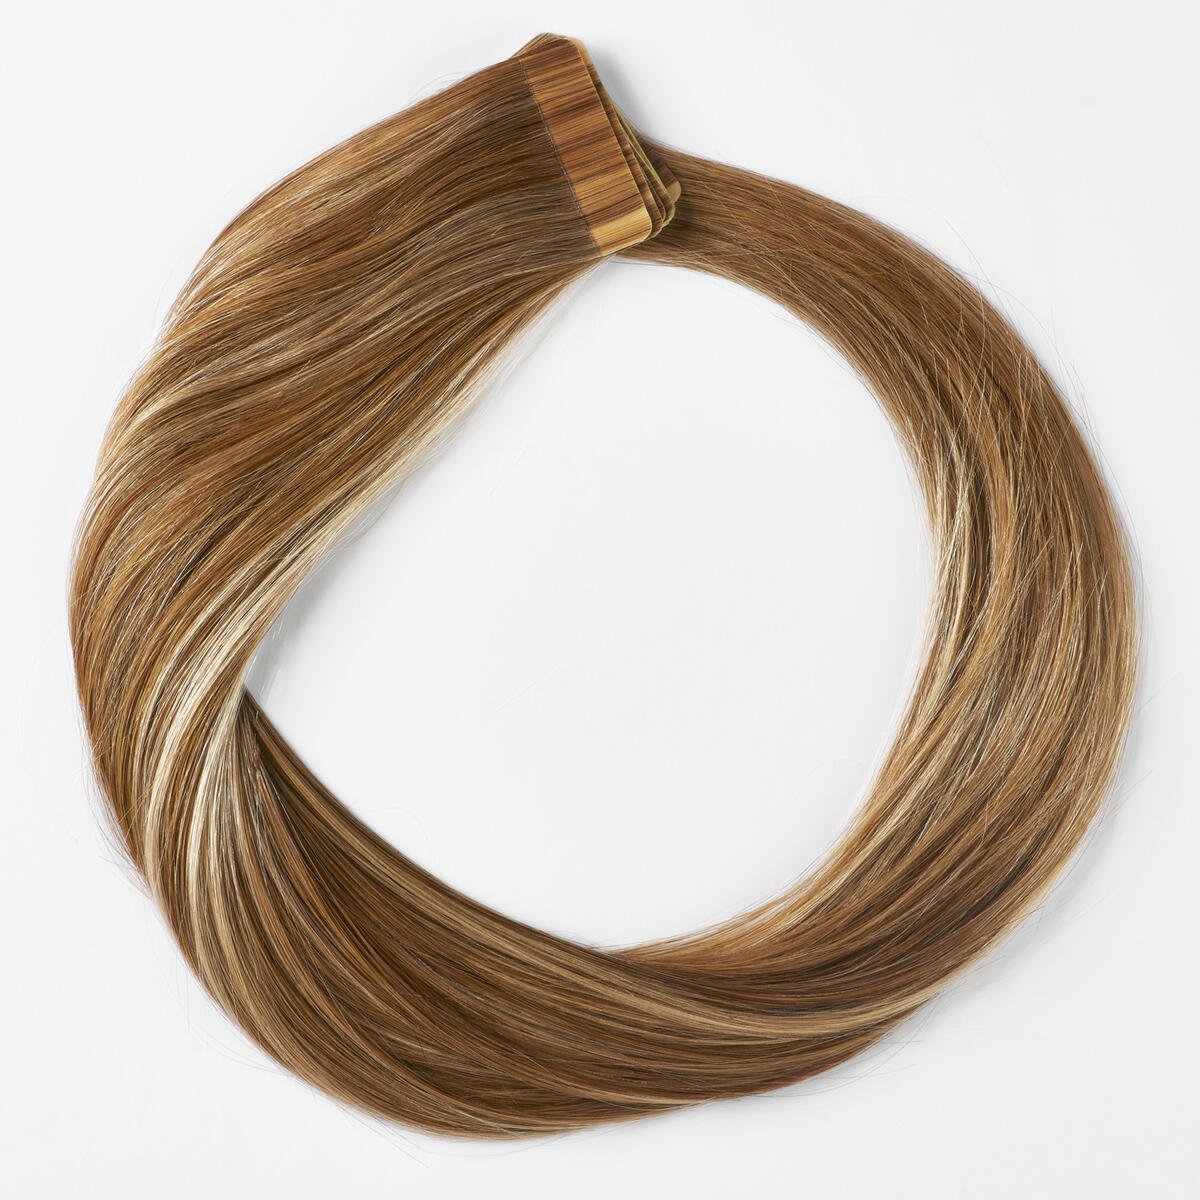 Basic Tape Extensions